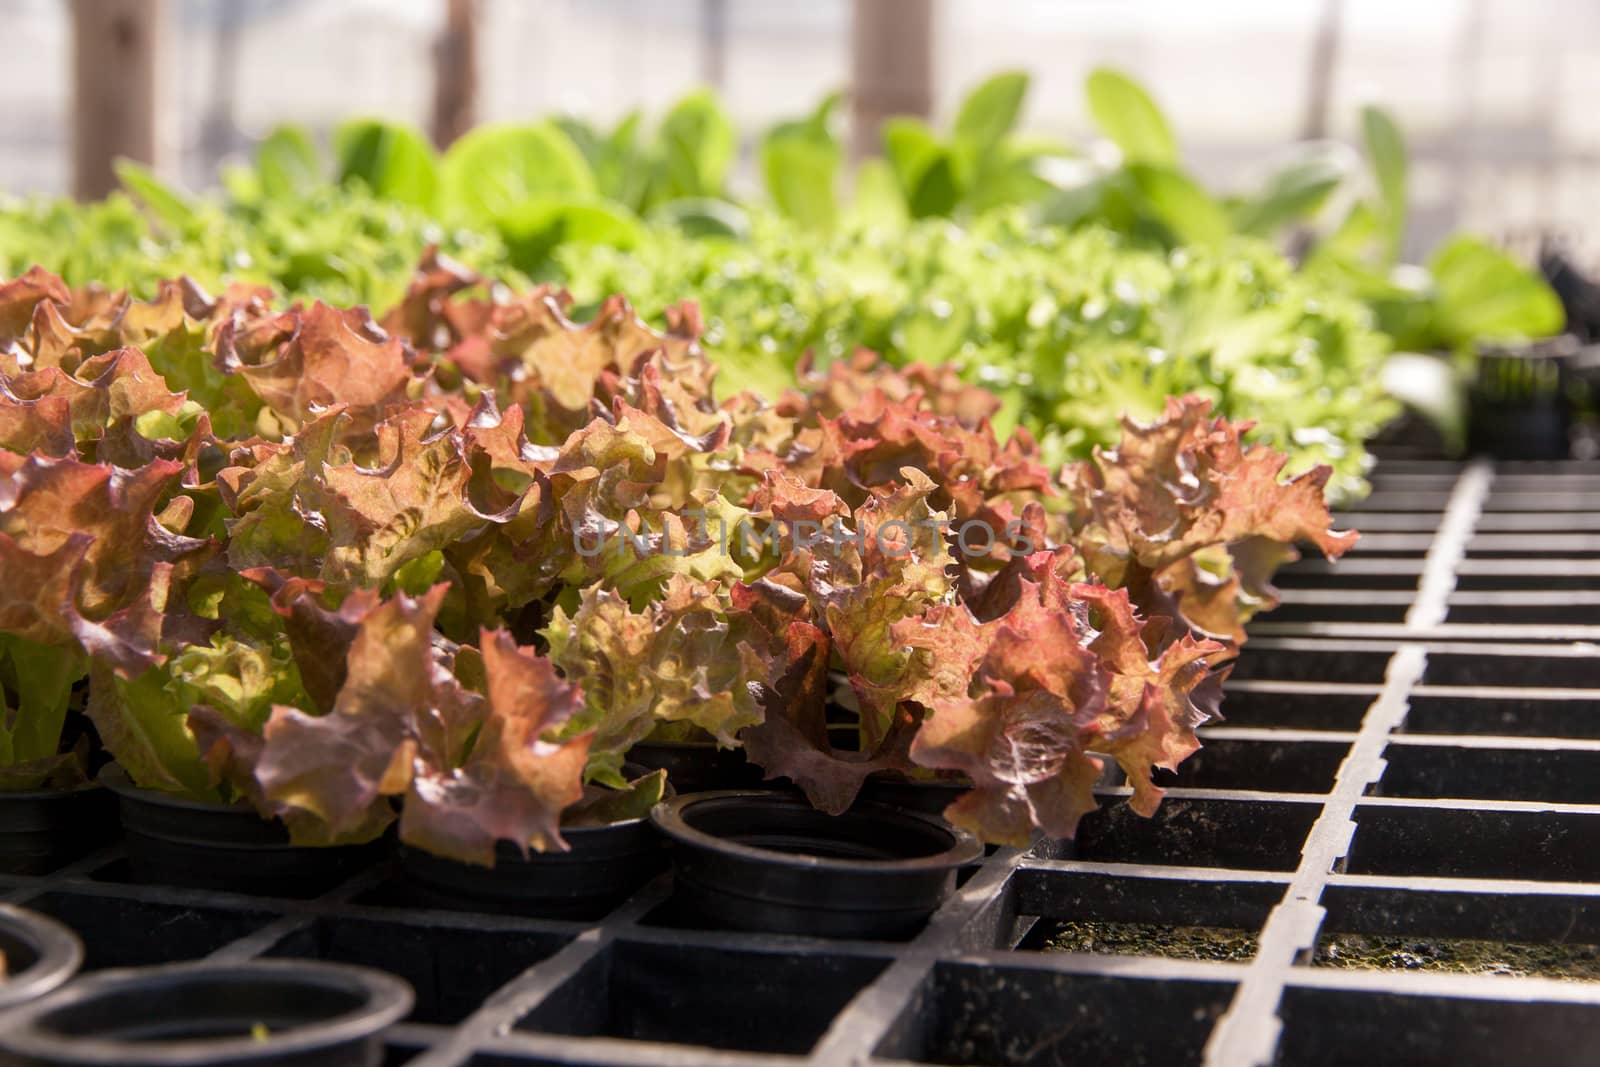 Organic hydroponic lettuce cultivation farm. Red lettuce and green lettuce.